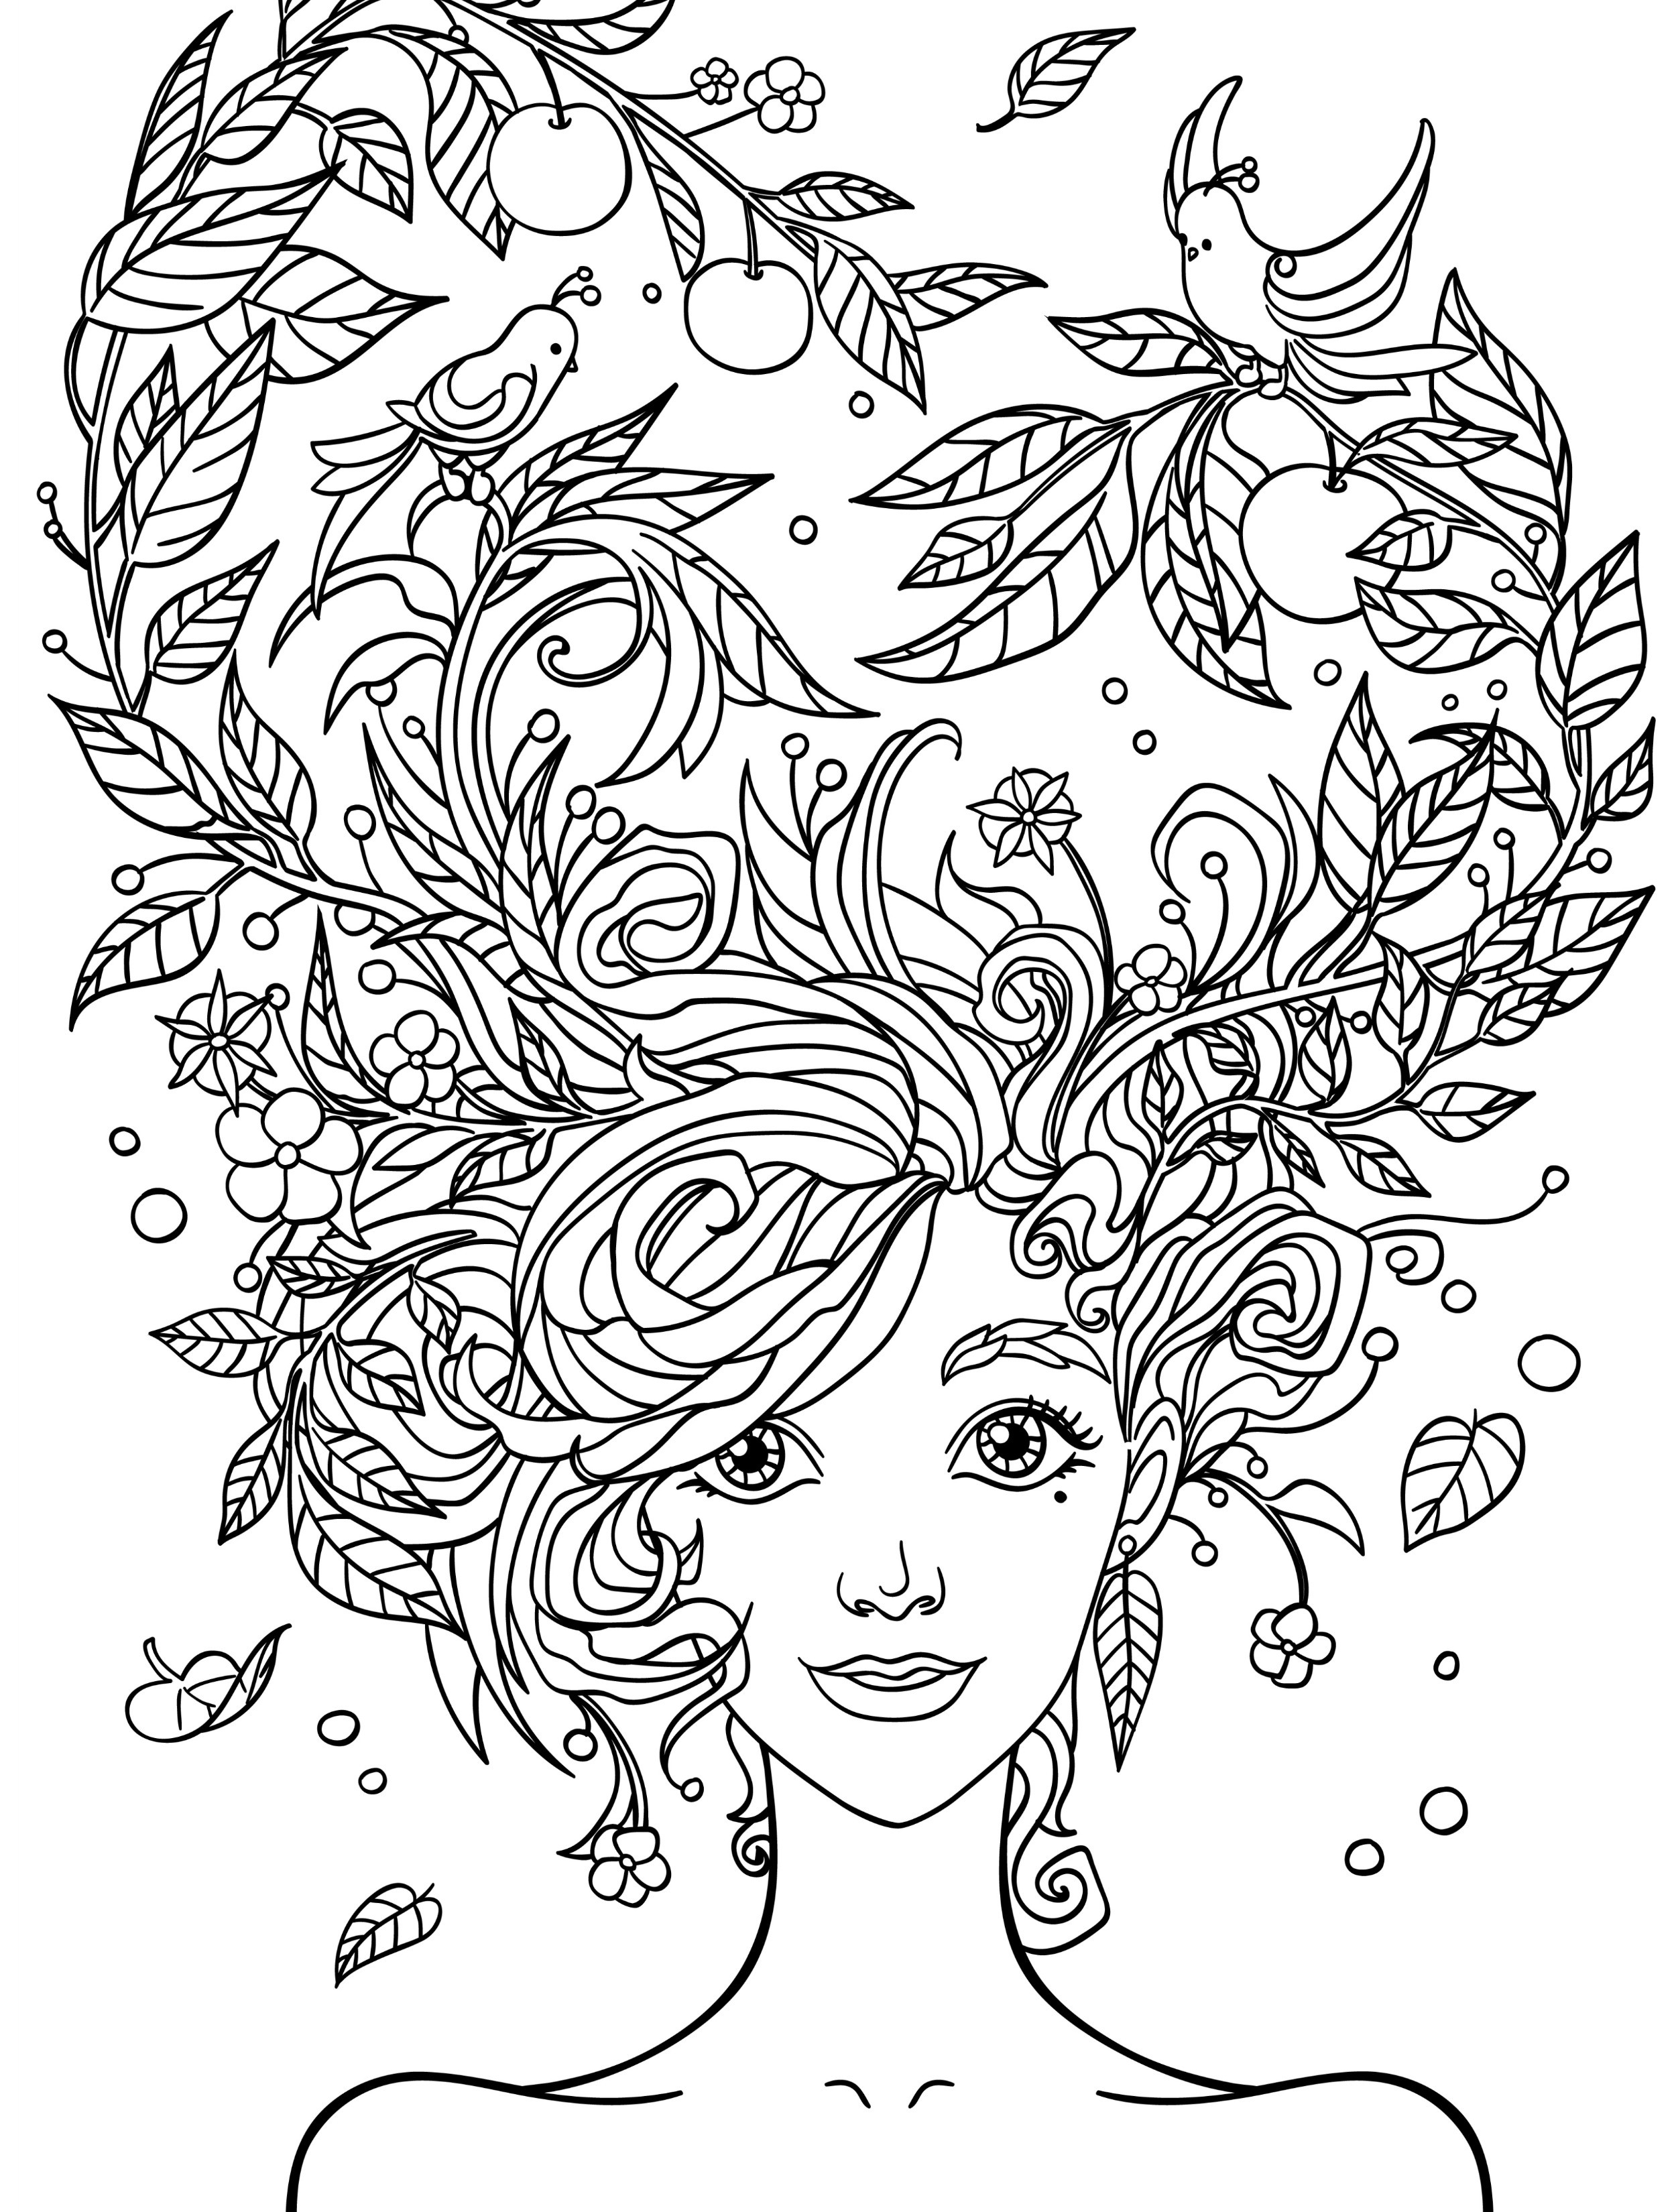 Cool Printable Coloring Pages For Adults
 10 Crazy Hair Adult Coloring Pages Page 5 of 12 Nerdy